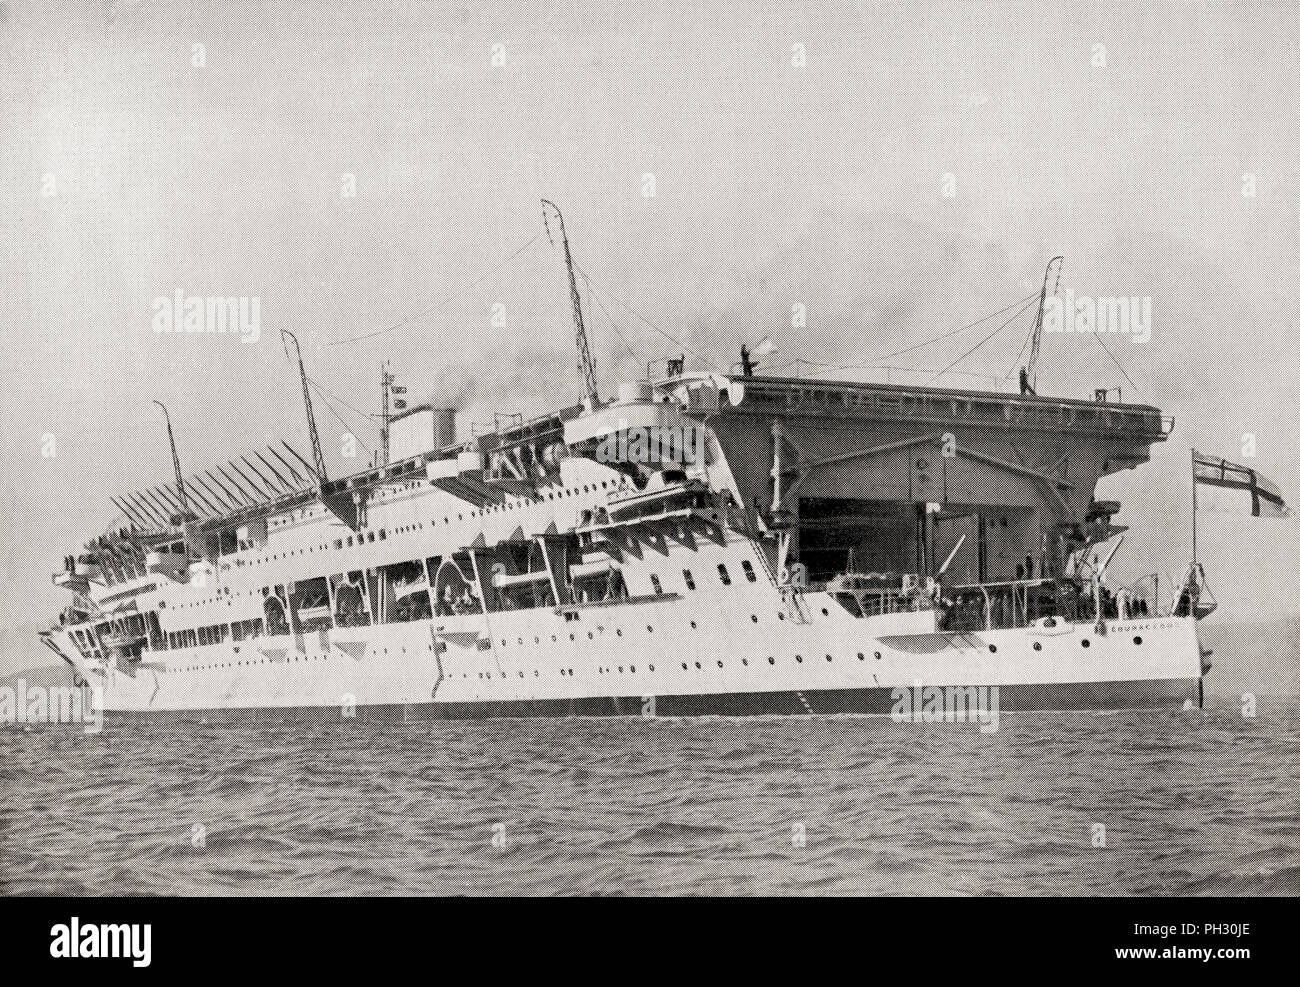 HMS Courageous.  One of the 'hush-hush' ships of the British Royal Navy during WWI, she was later converted into a aircraft carrier.  From The Book of Ships, published c.1920. Stock Photo